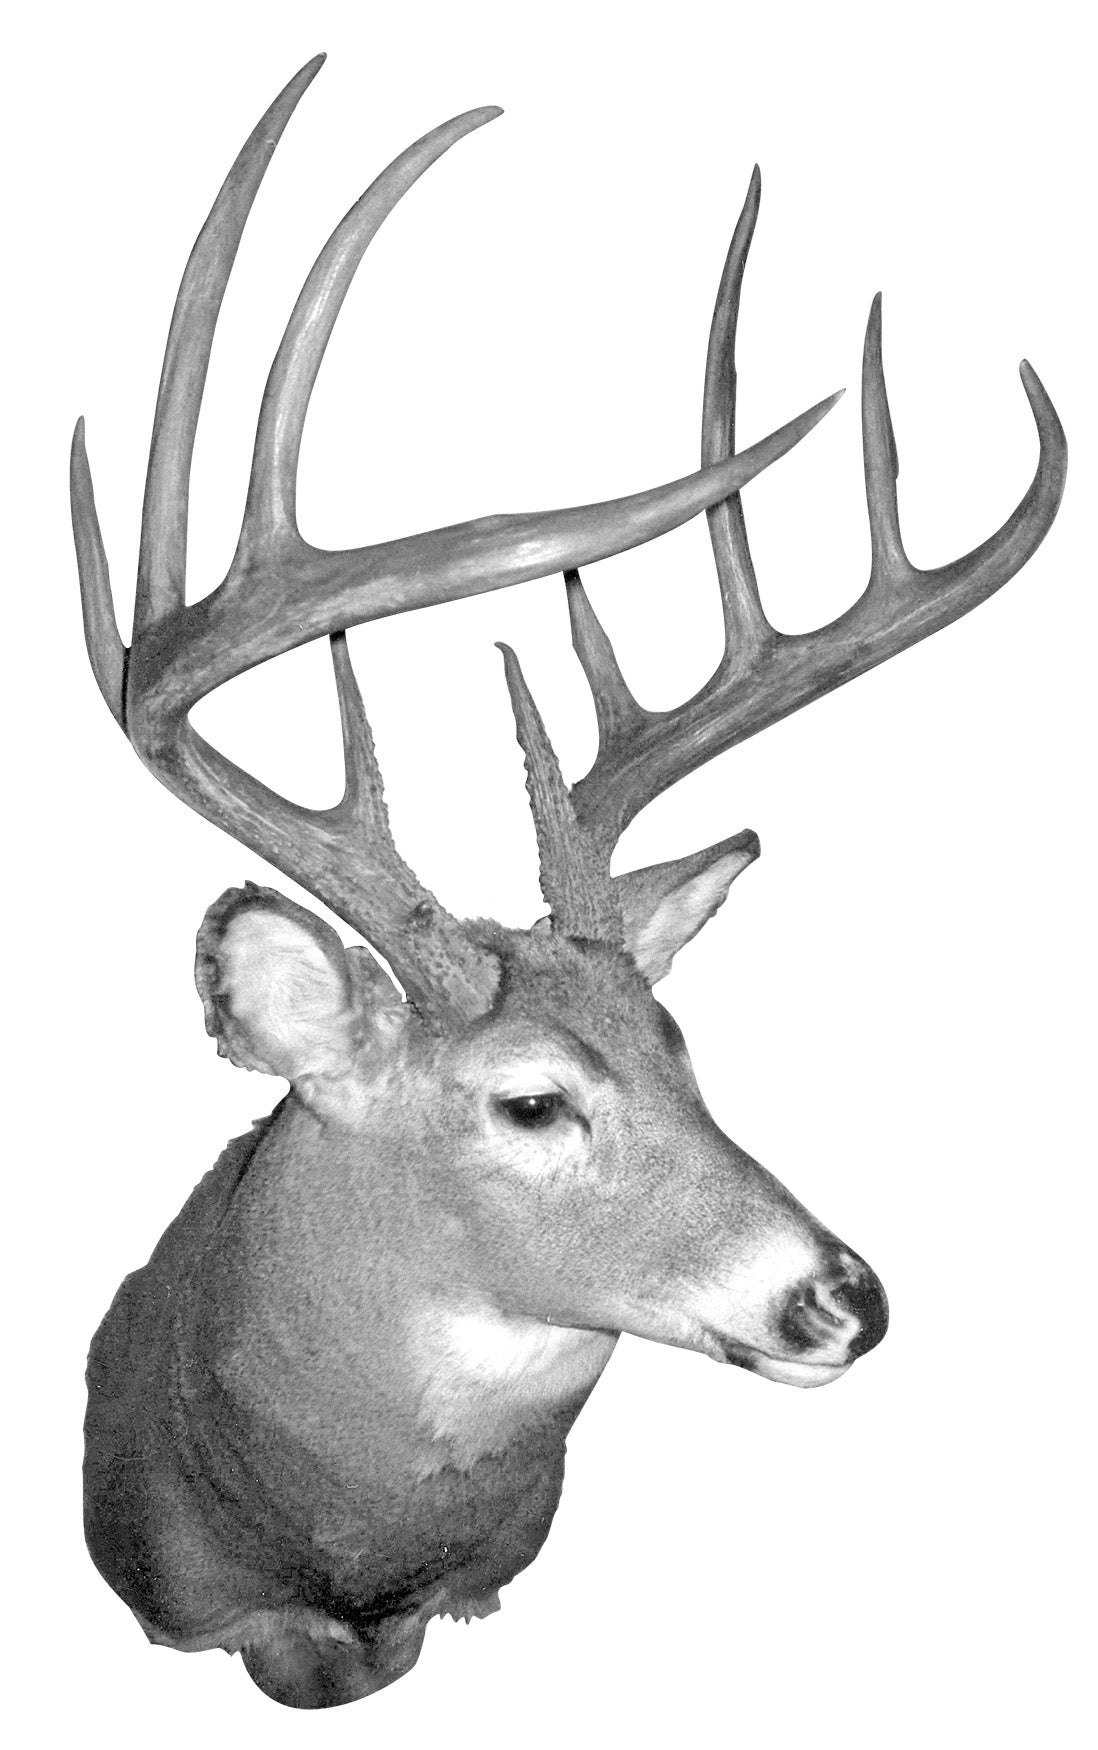 B&C record whitetail deer from Vermont